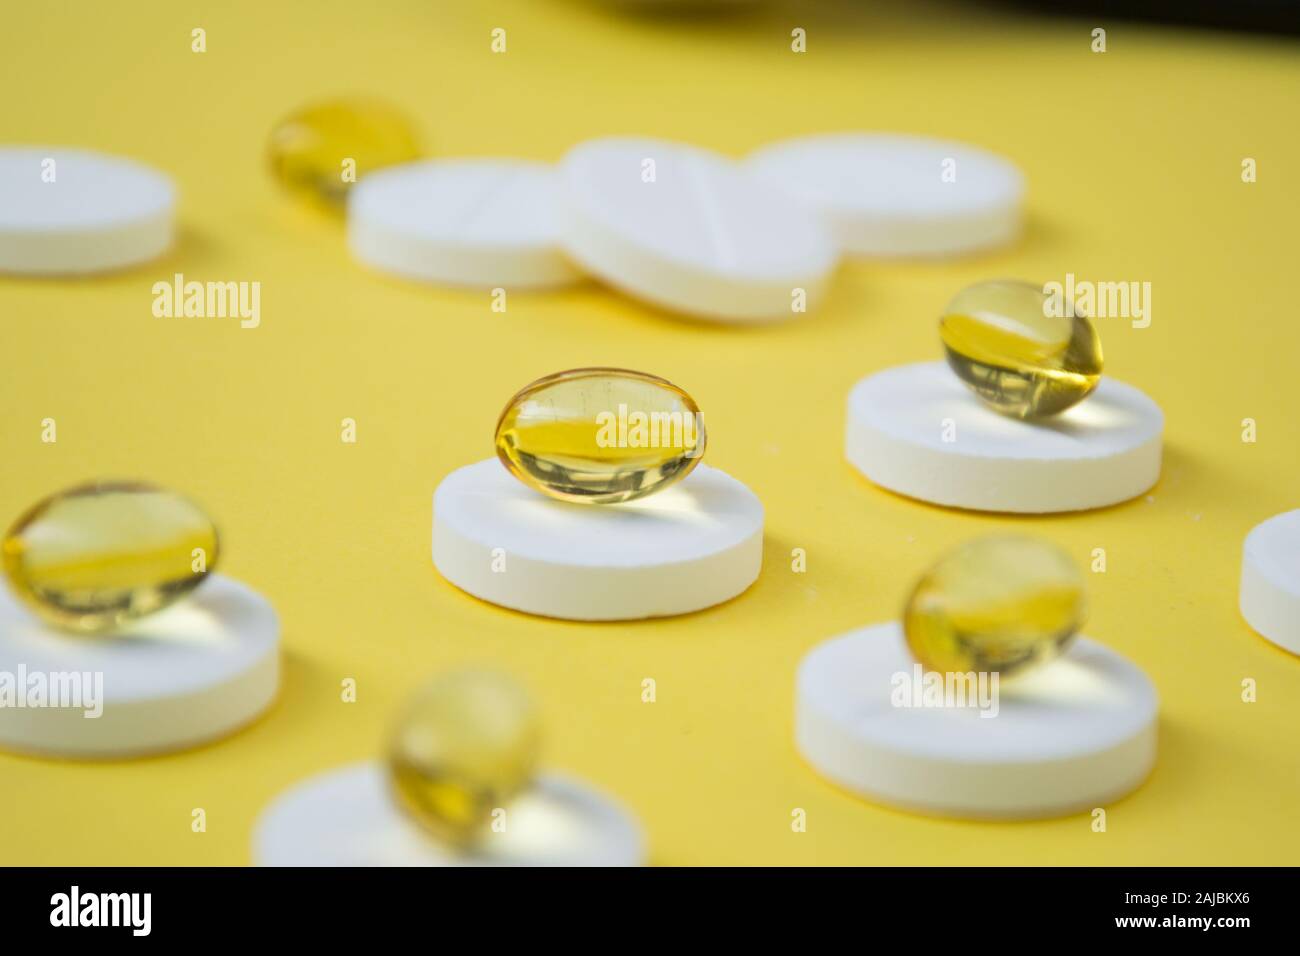 Close-up of golden colored oil supplements, soft gel capsule on top of round white pills, health concept, pharmaceutical tablets Stock Photo